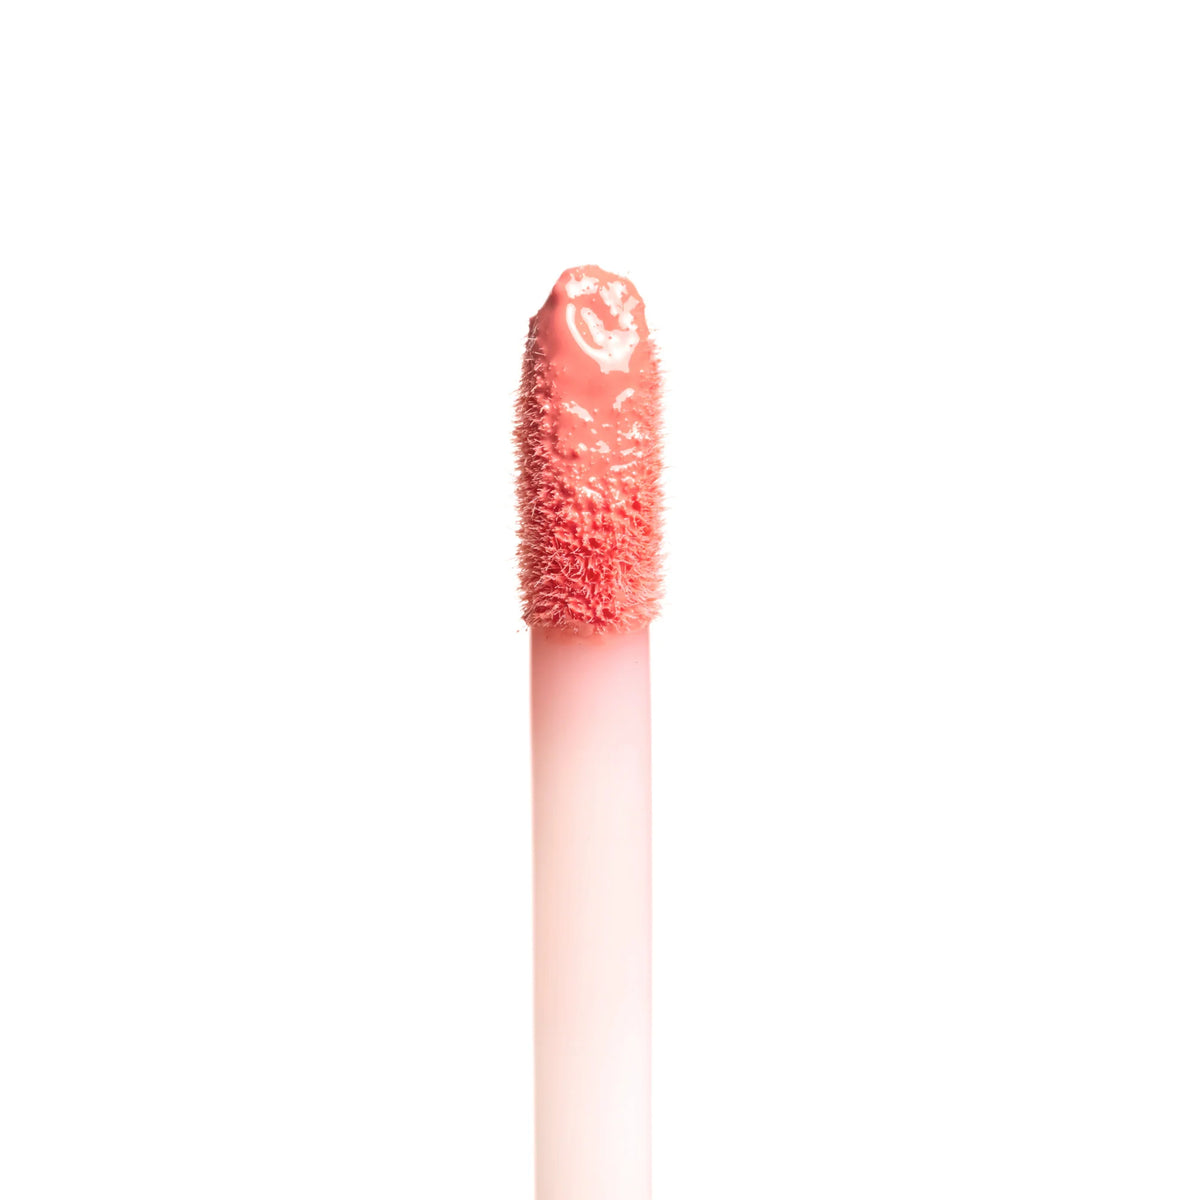 Tok beauty lip tonic in bloom pink color wand texture